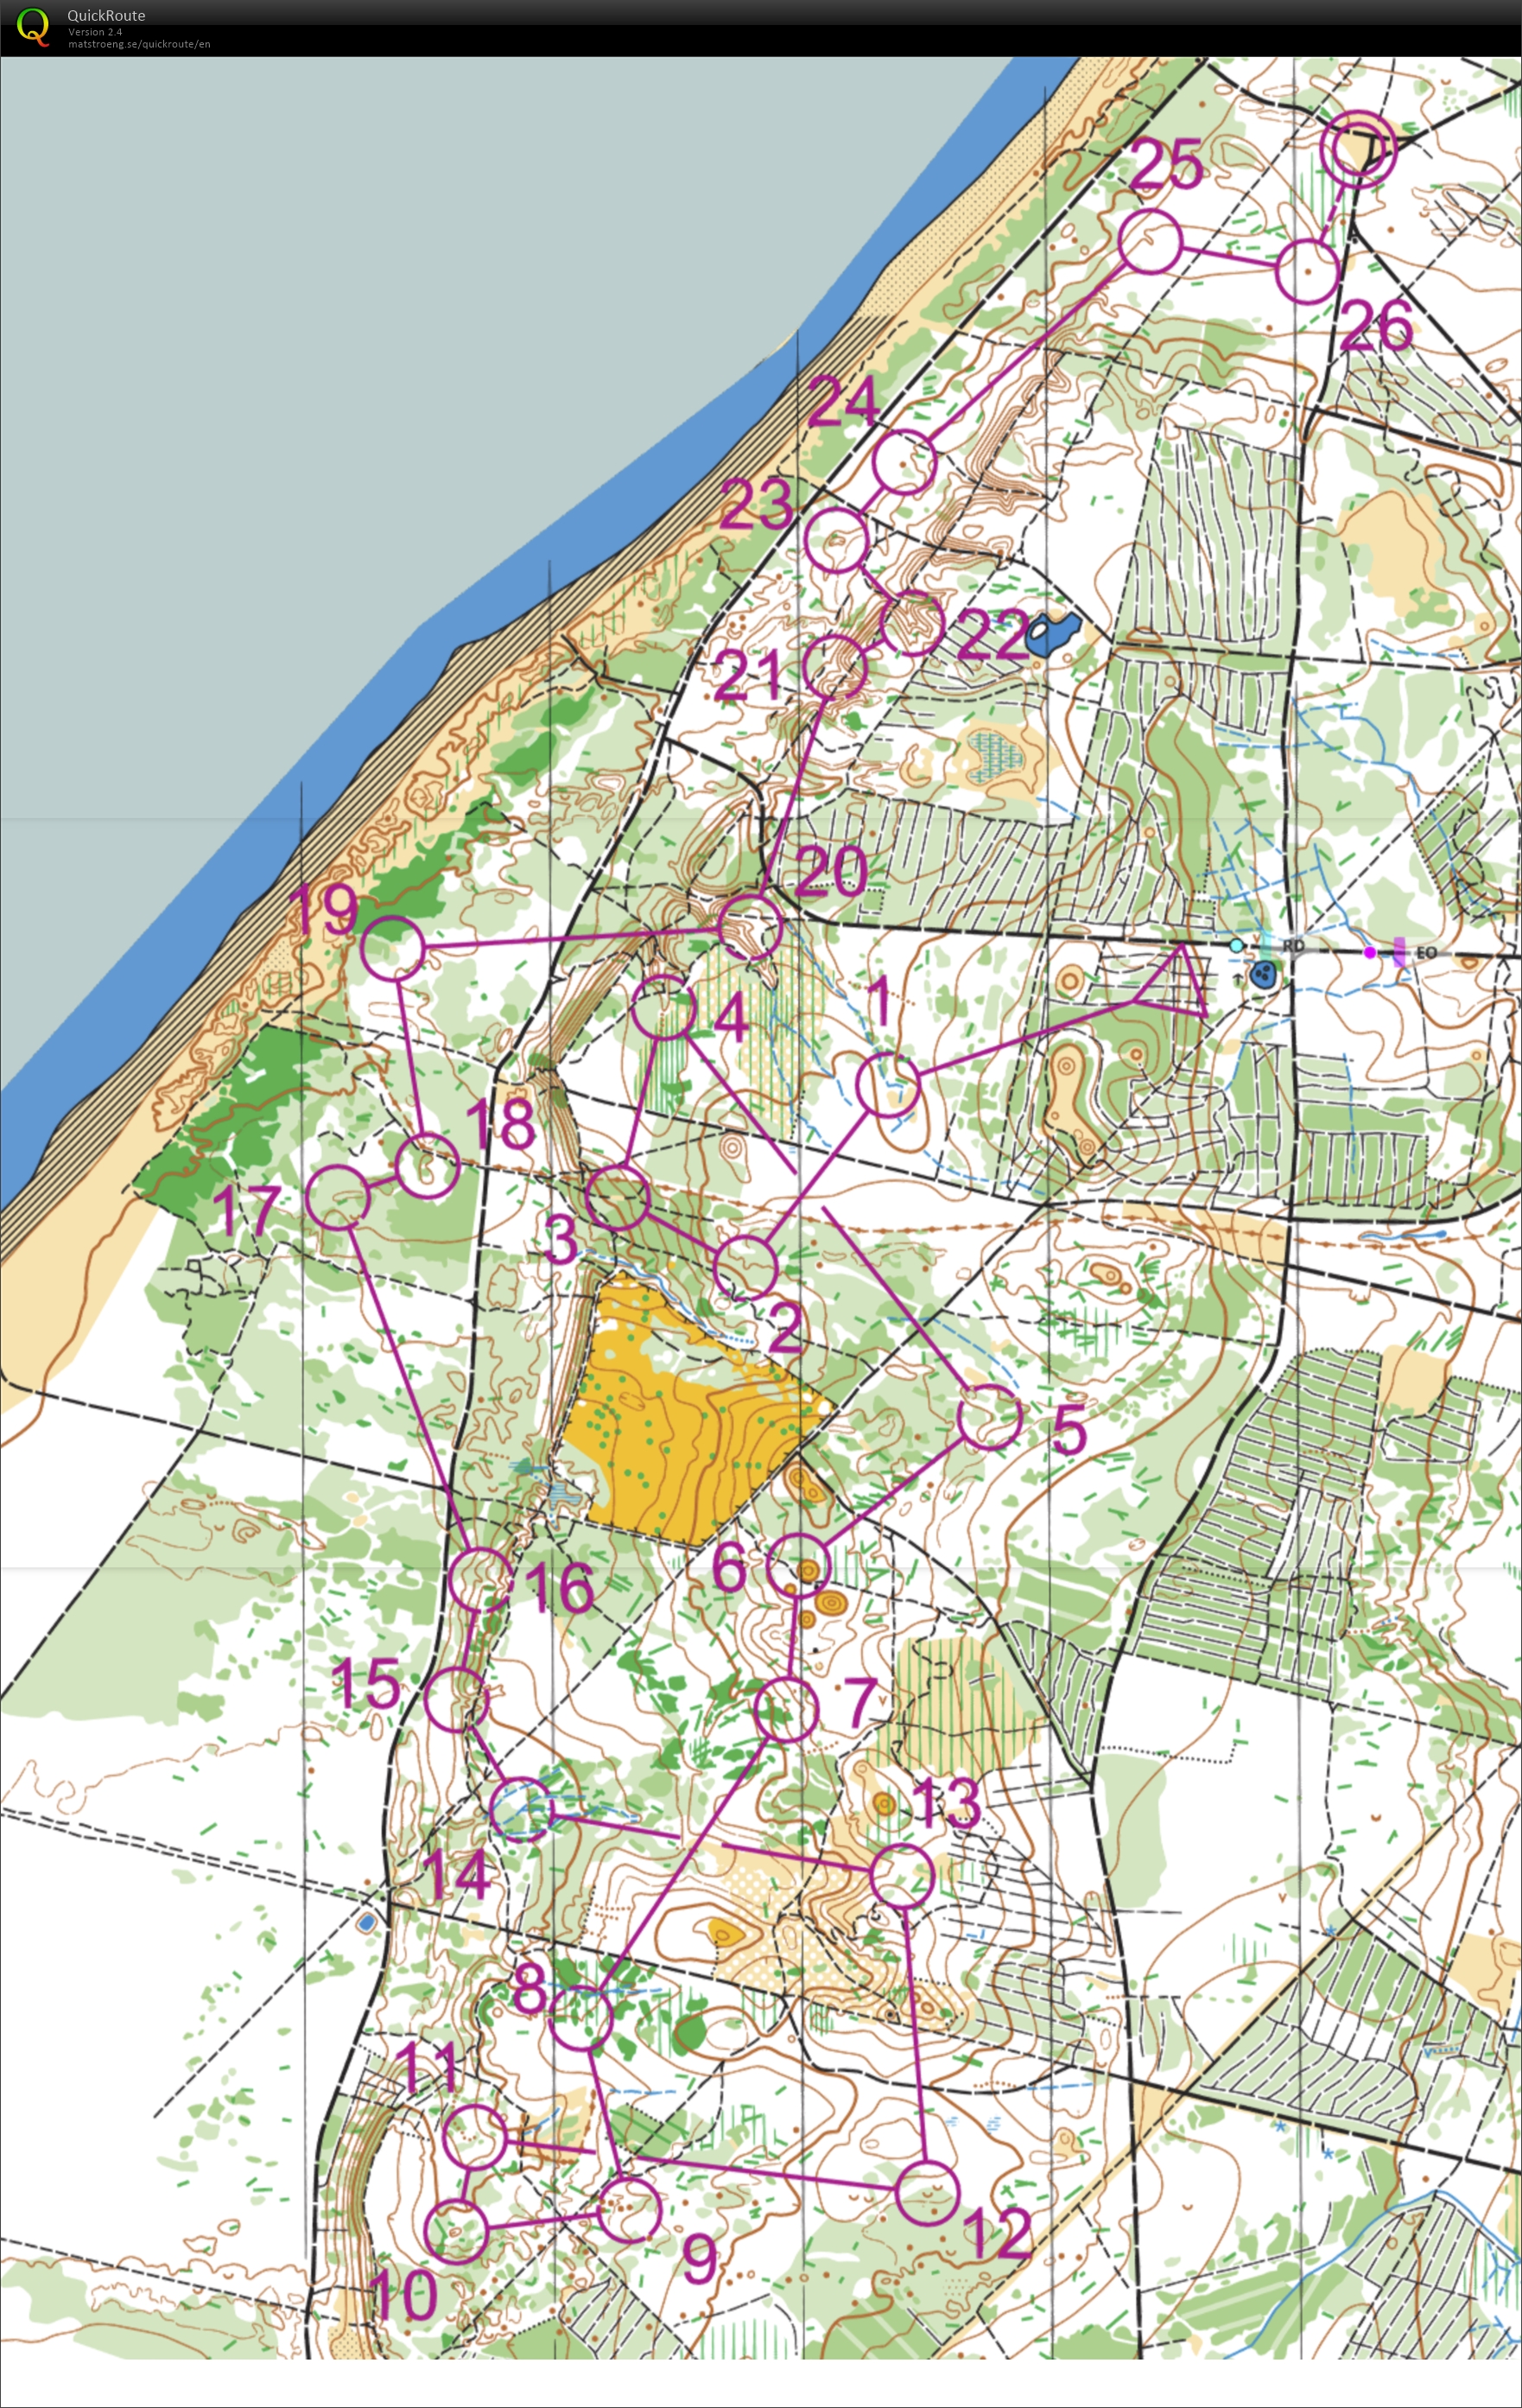 Danish spring middle WRE (30.03.2019)